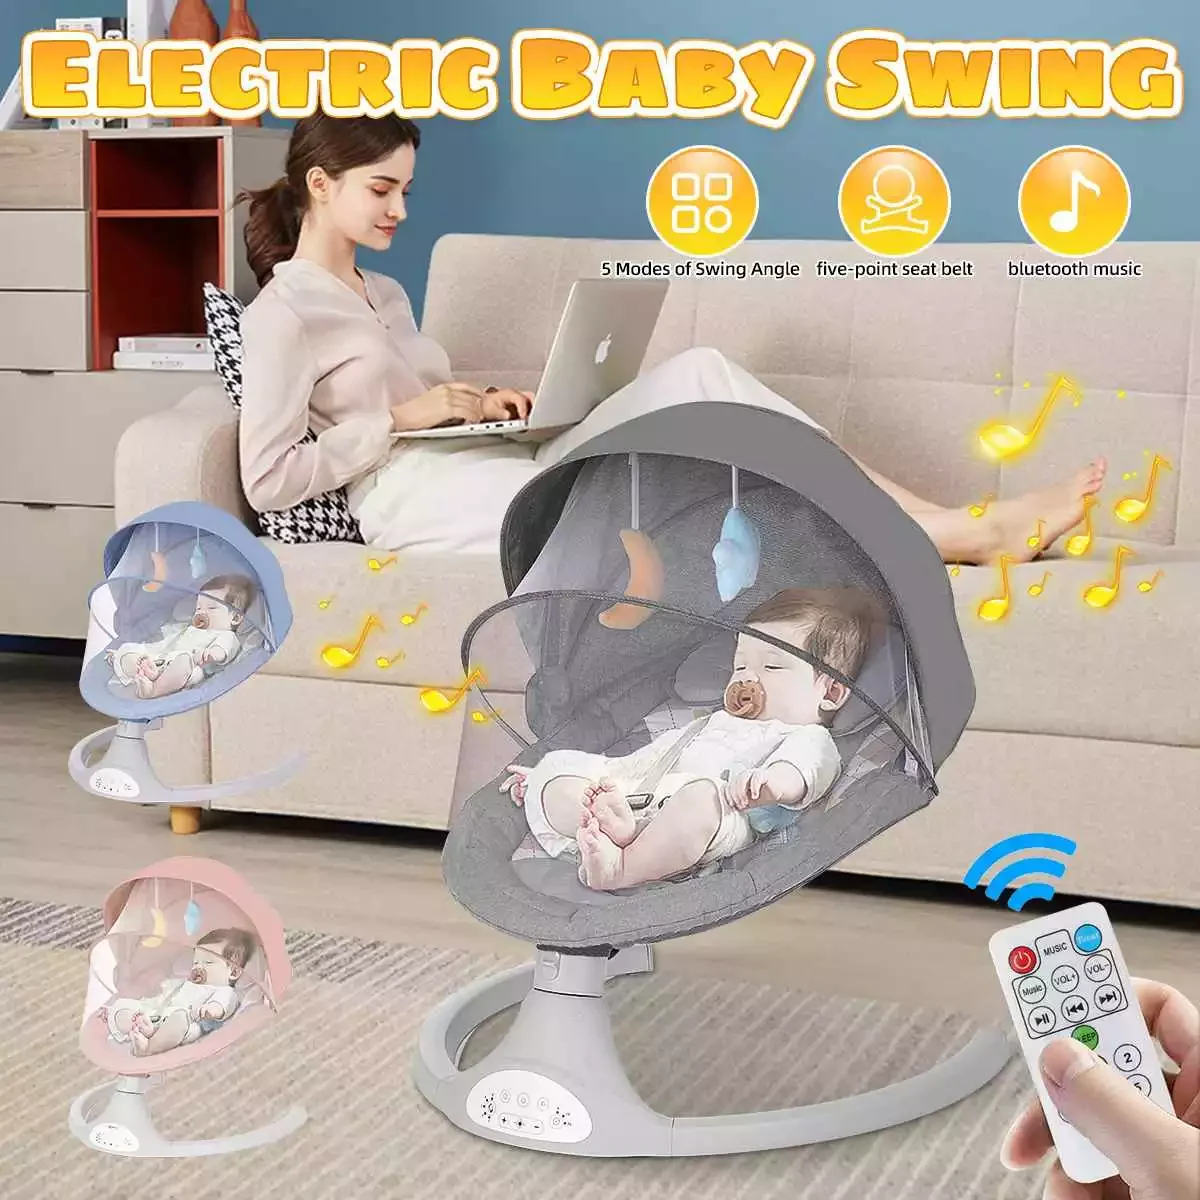 Baby Swing Baby Lounger Chaise Longue for Baby Resting Chair Rocking Chair with bluetooth Music Remote Control Baby Cot